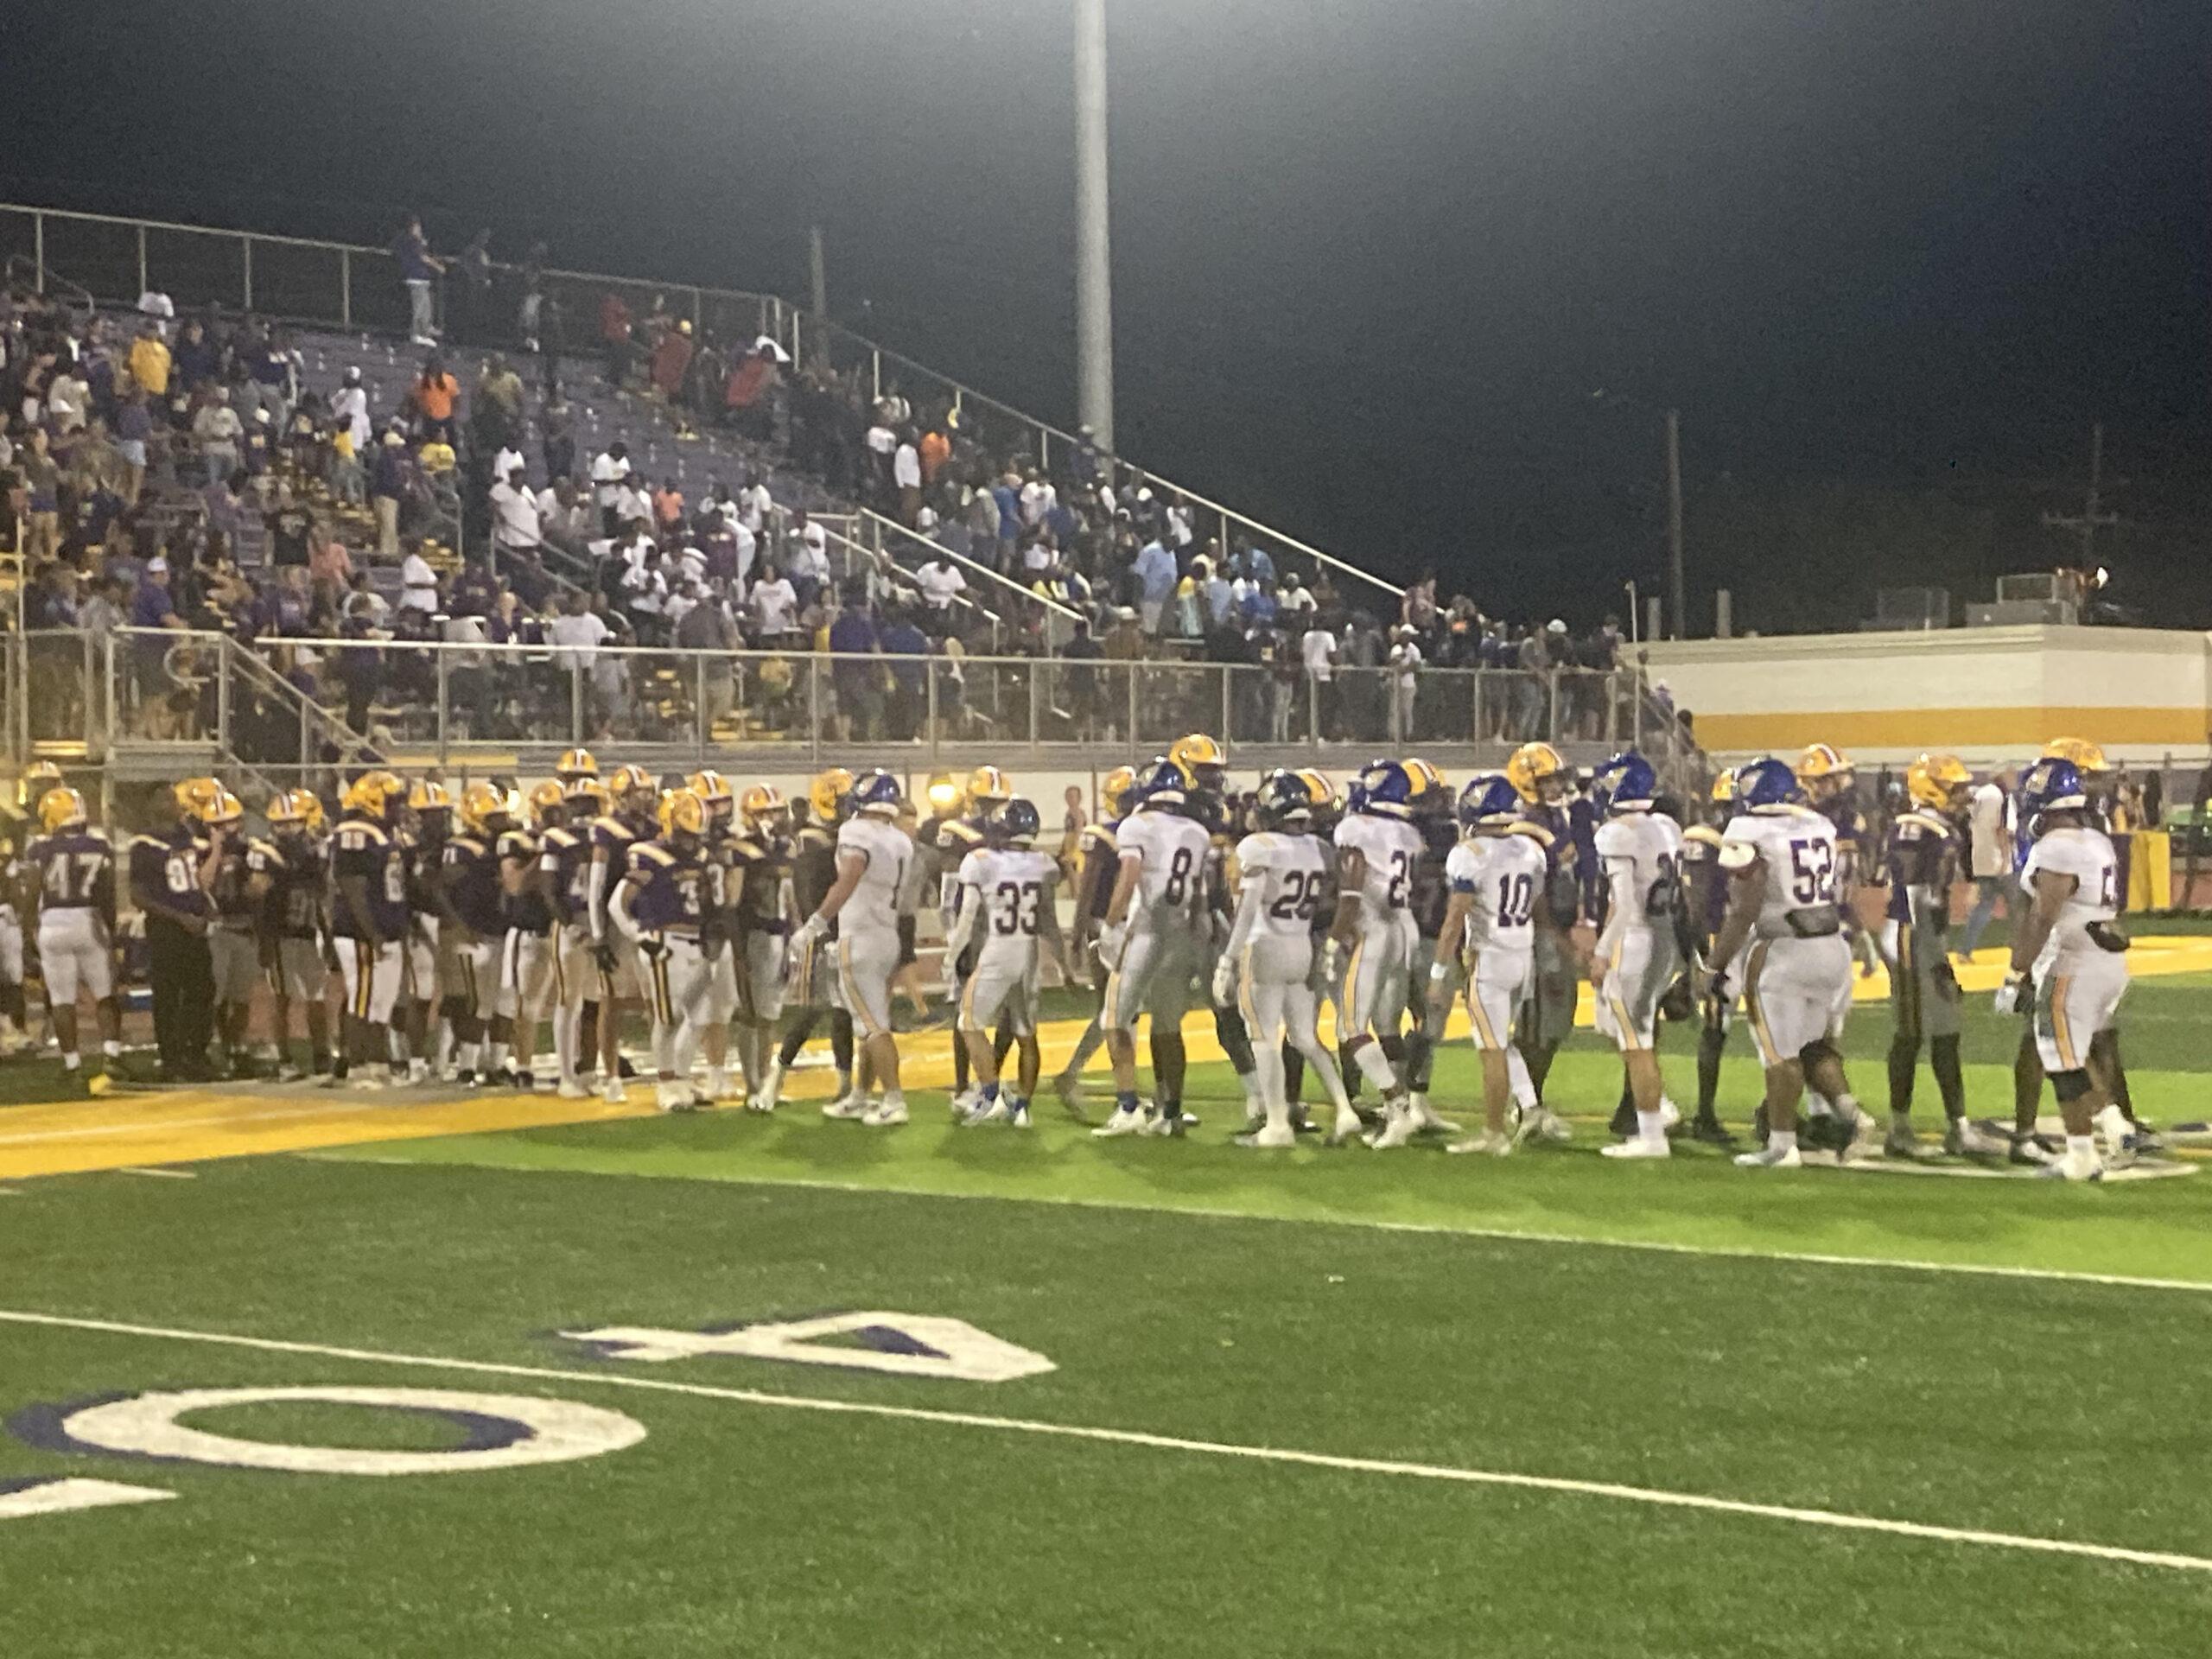 St. Charles Catholic Narrowly Escapes Lutcher with a 16-14, Last-Second Victory